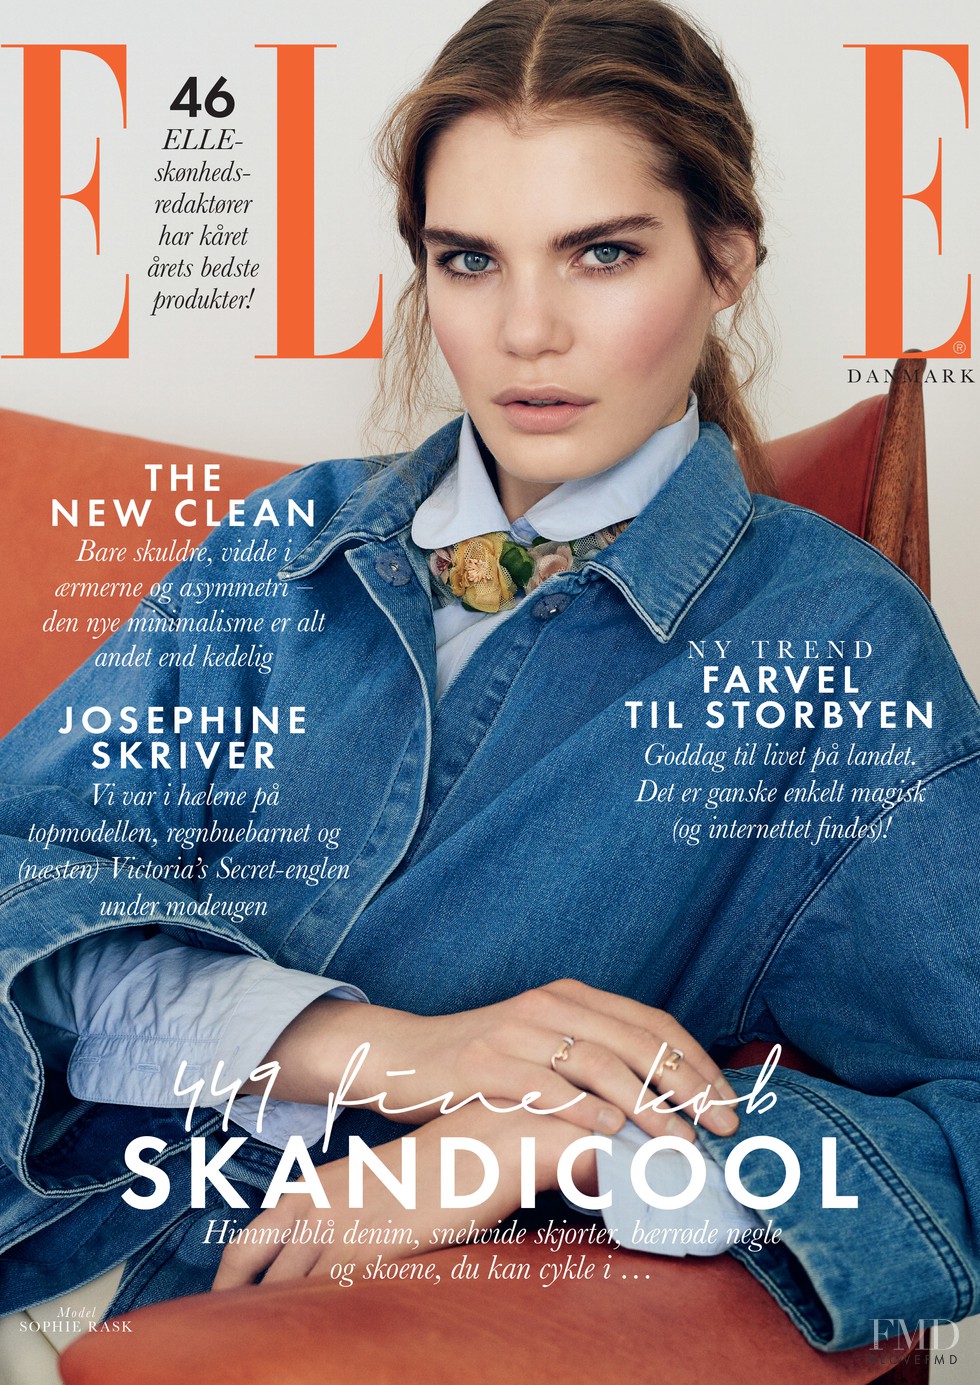 Cover of Elle Dubai with Sophie Rask, January 2016 (ID:40288), Magazines